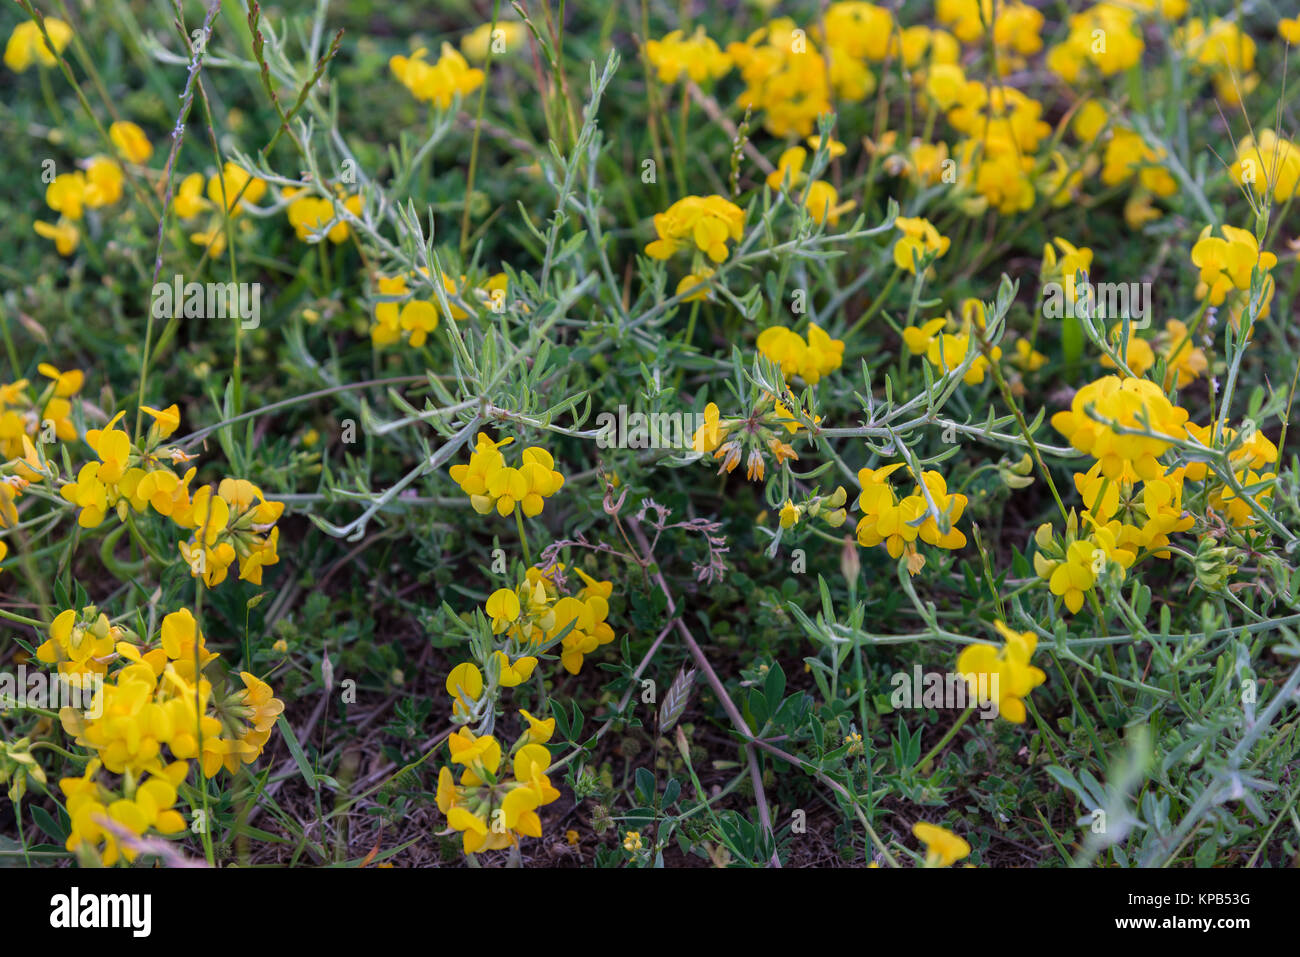 Spring wildflowers growing in a field closeup Stock Photo